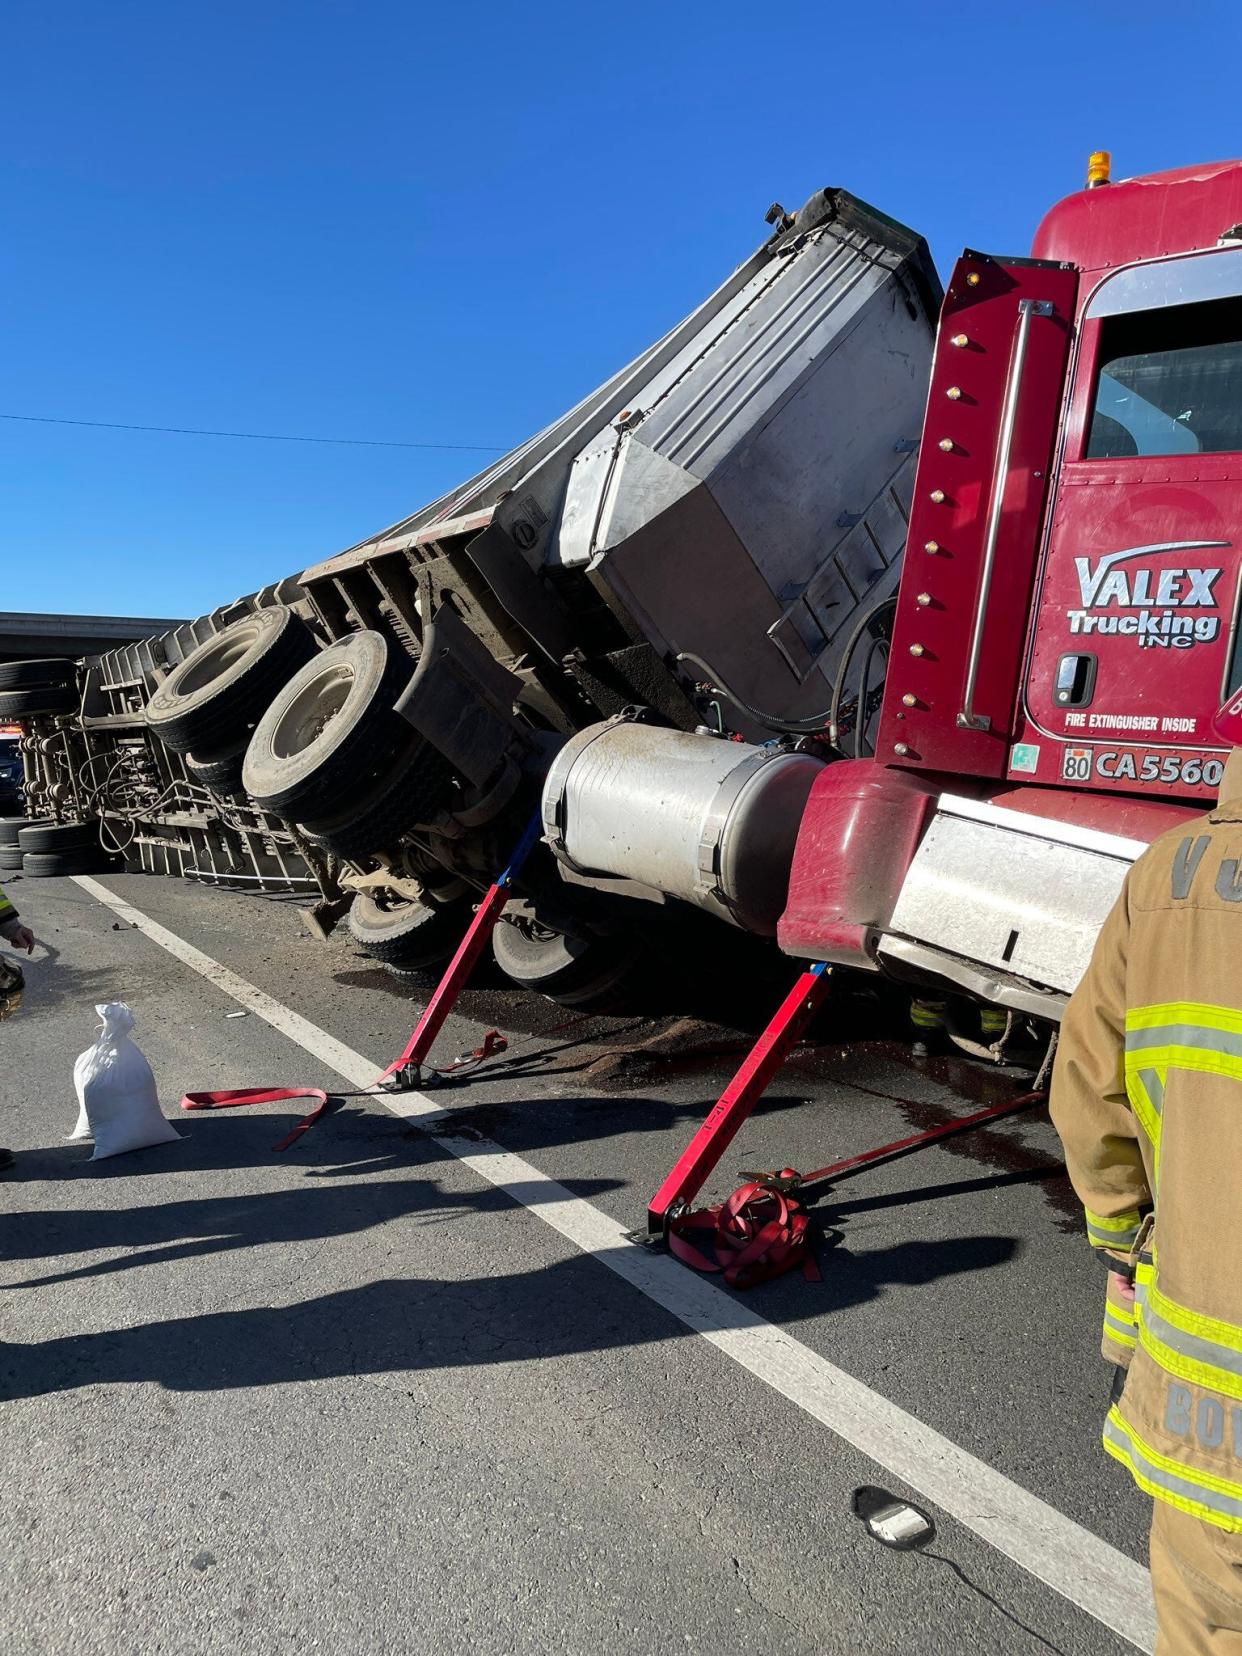 A crash between a big rig and a commercial truck on Madera Road in Simi Valley Tuesday morning, Jan. 31, 2023, shut the intersection at Viewline Drive for a time.